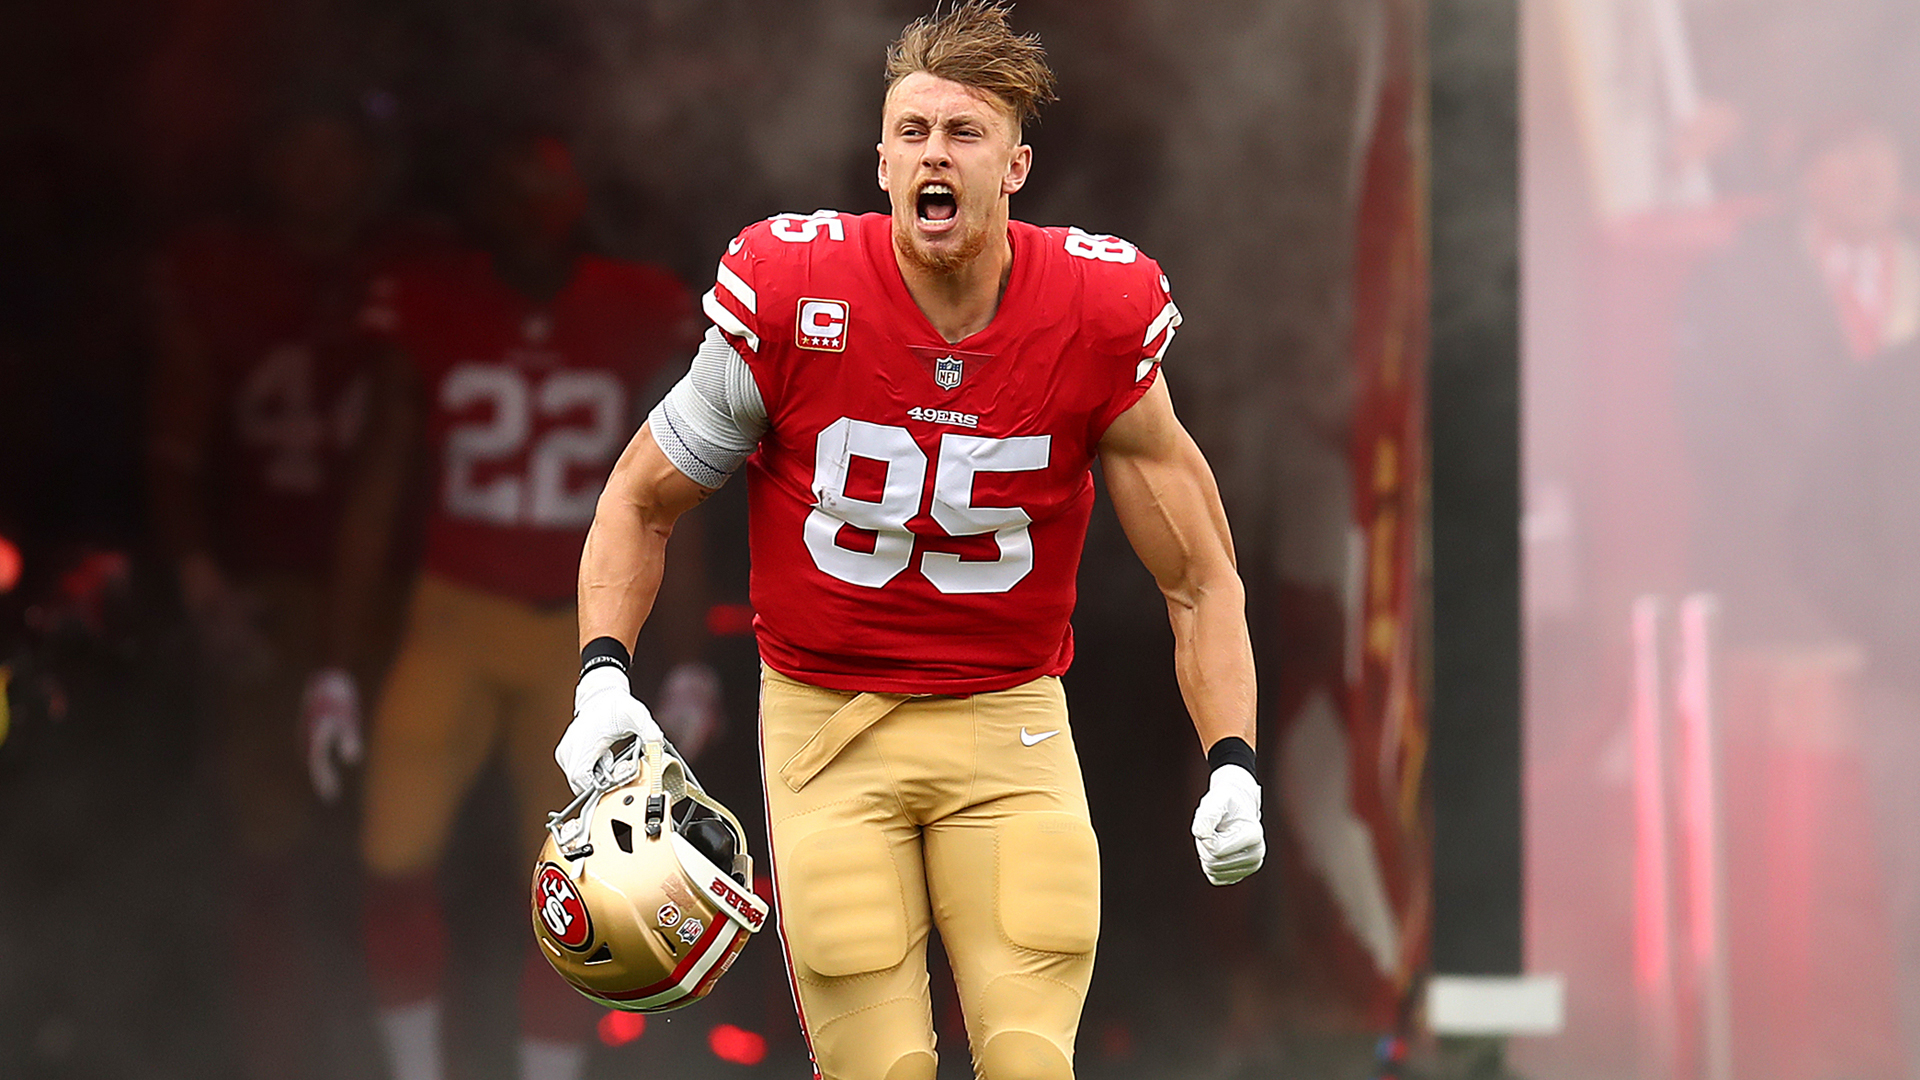 George Kittle's breakout season fueled by 'angry mindset.